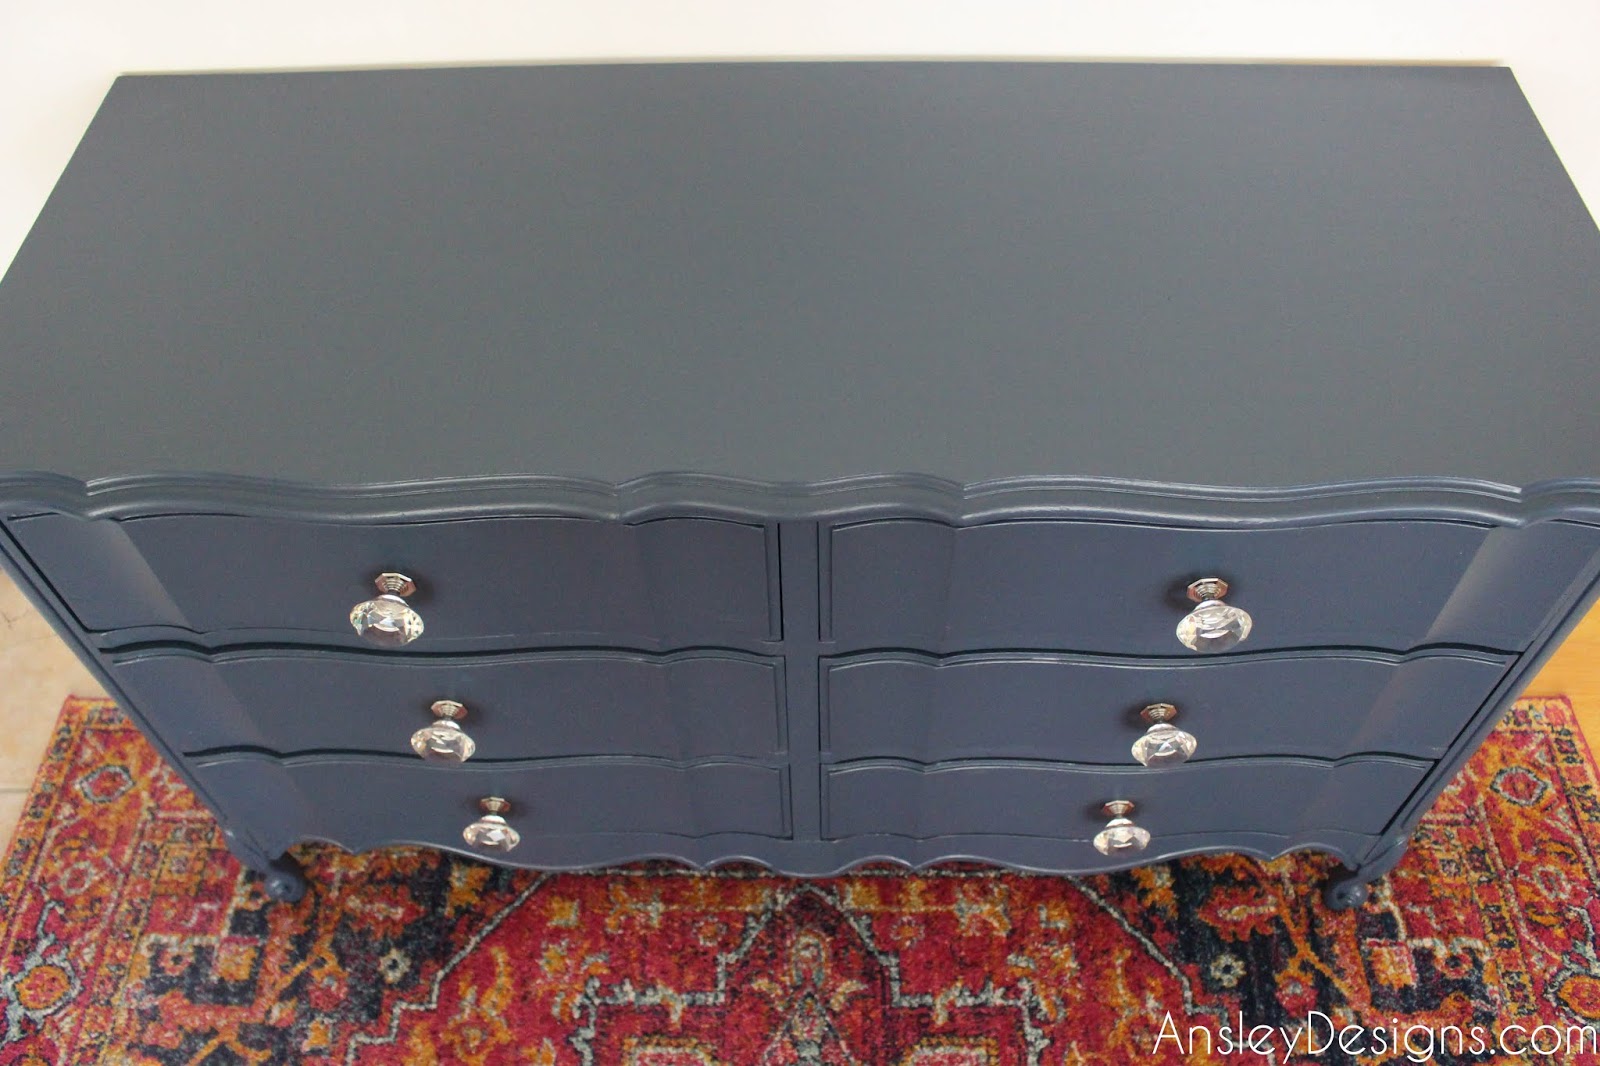 Ansley Designs Navy Blue French Provincial Dresser With Crystal Knobs